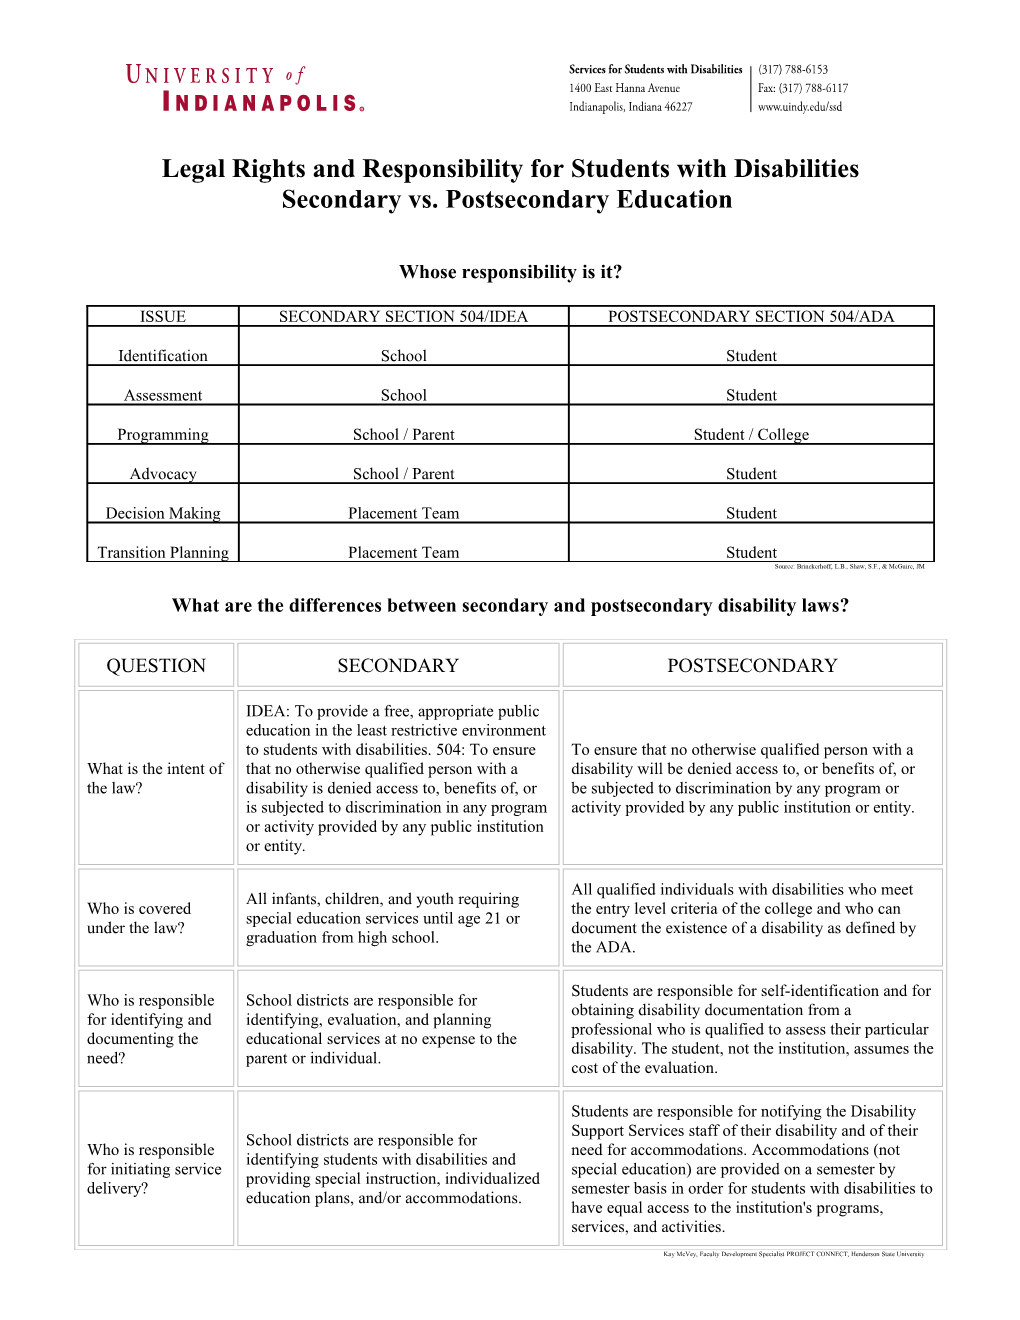 Legal Rights and Responsibility for Students with Disabilities